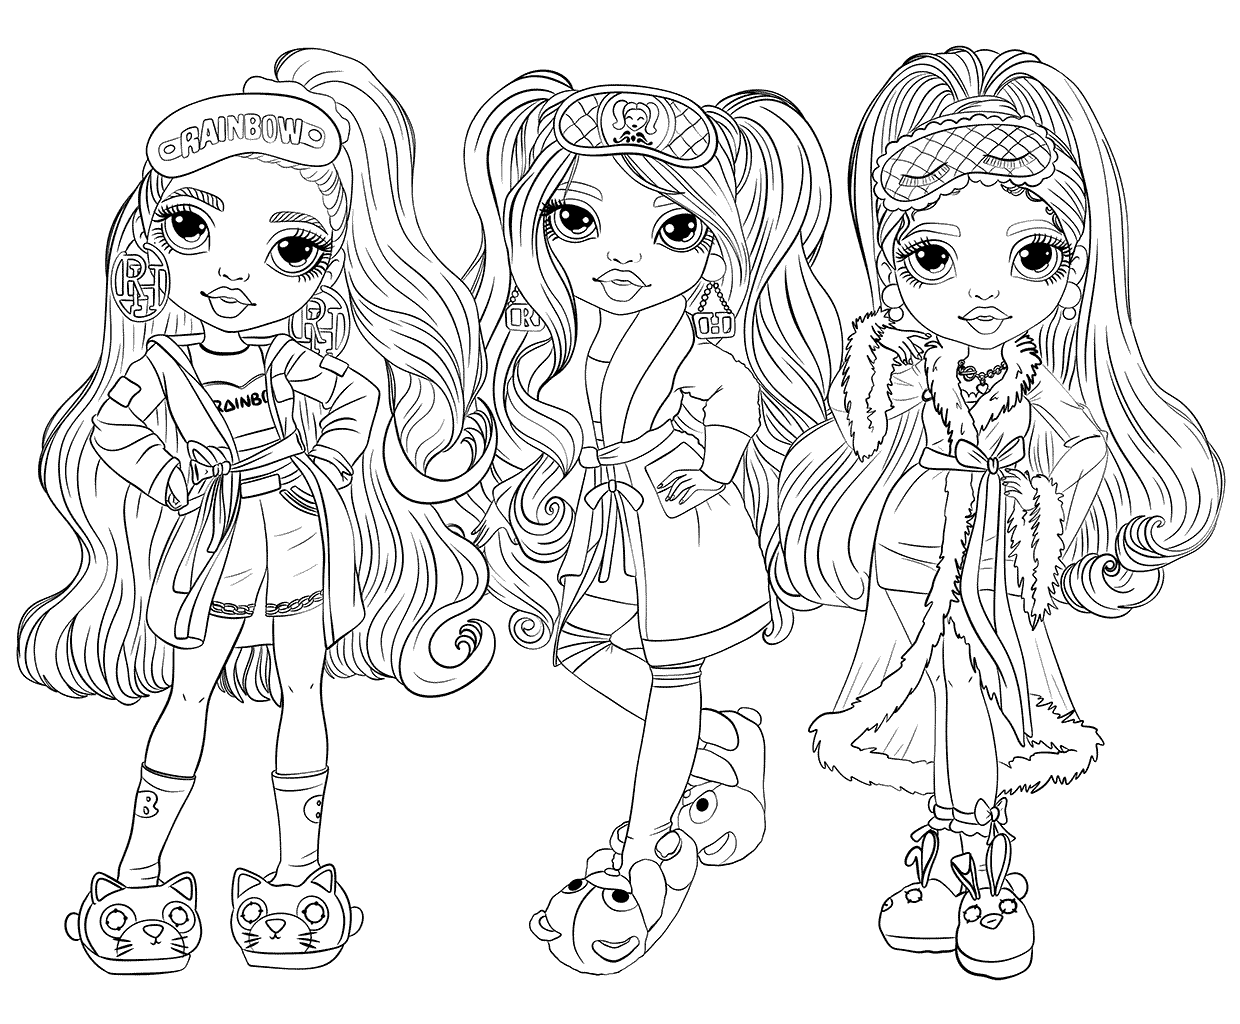 Rainbow High Coloring Pages PDF Printable - Free Printable Rainbow High Coloring Pages